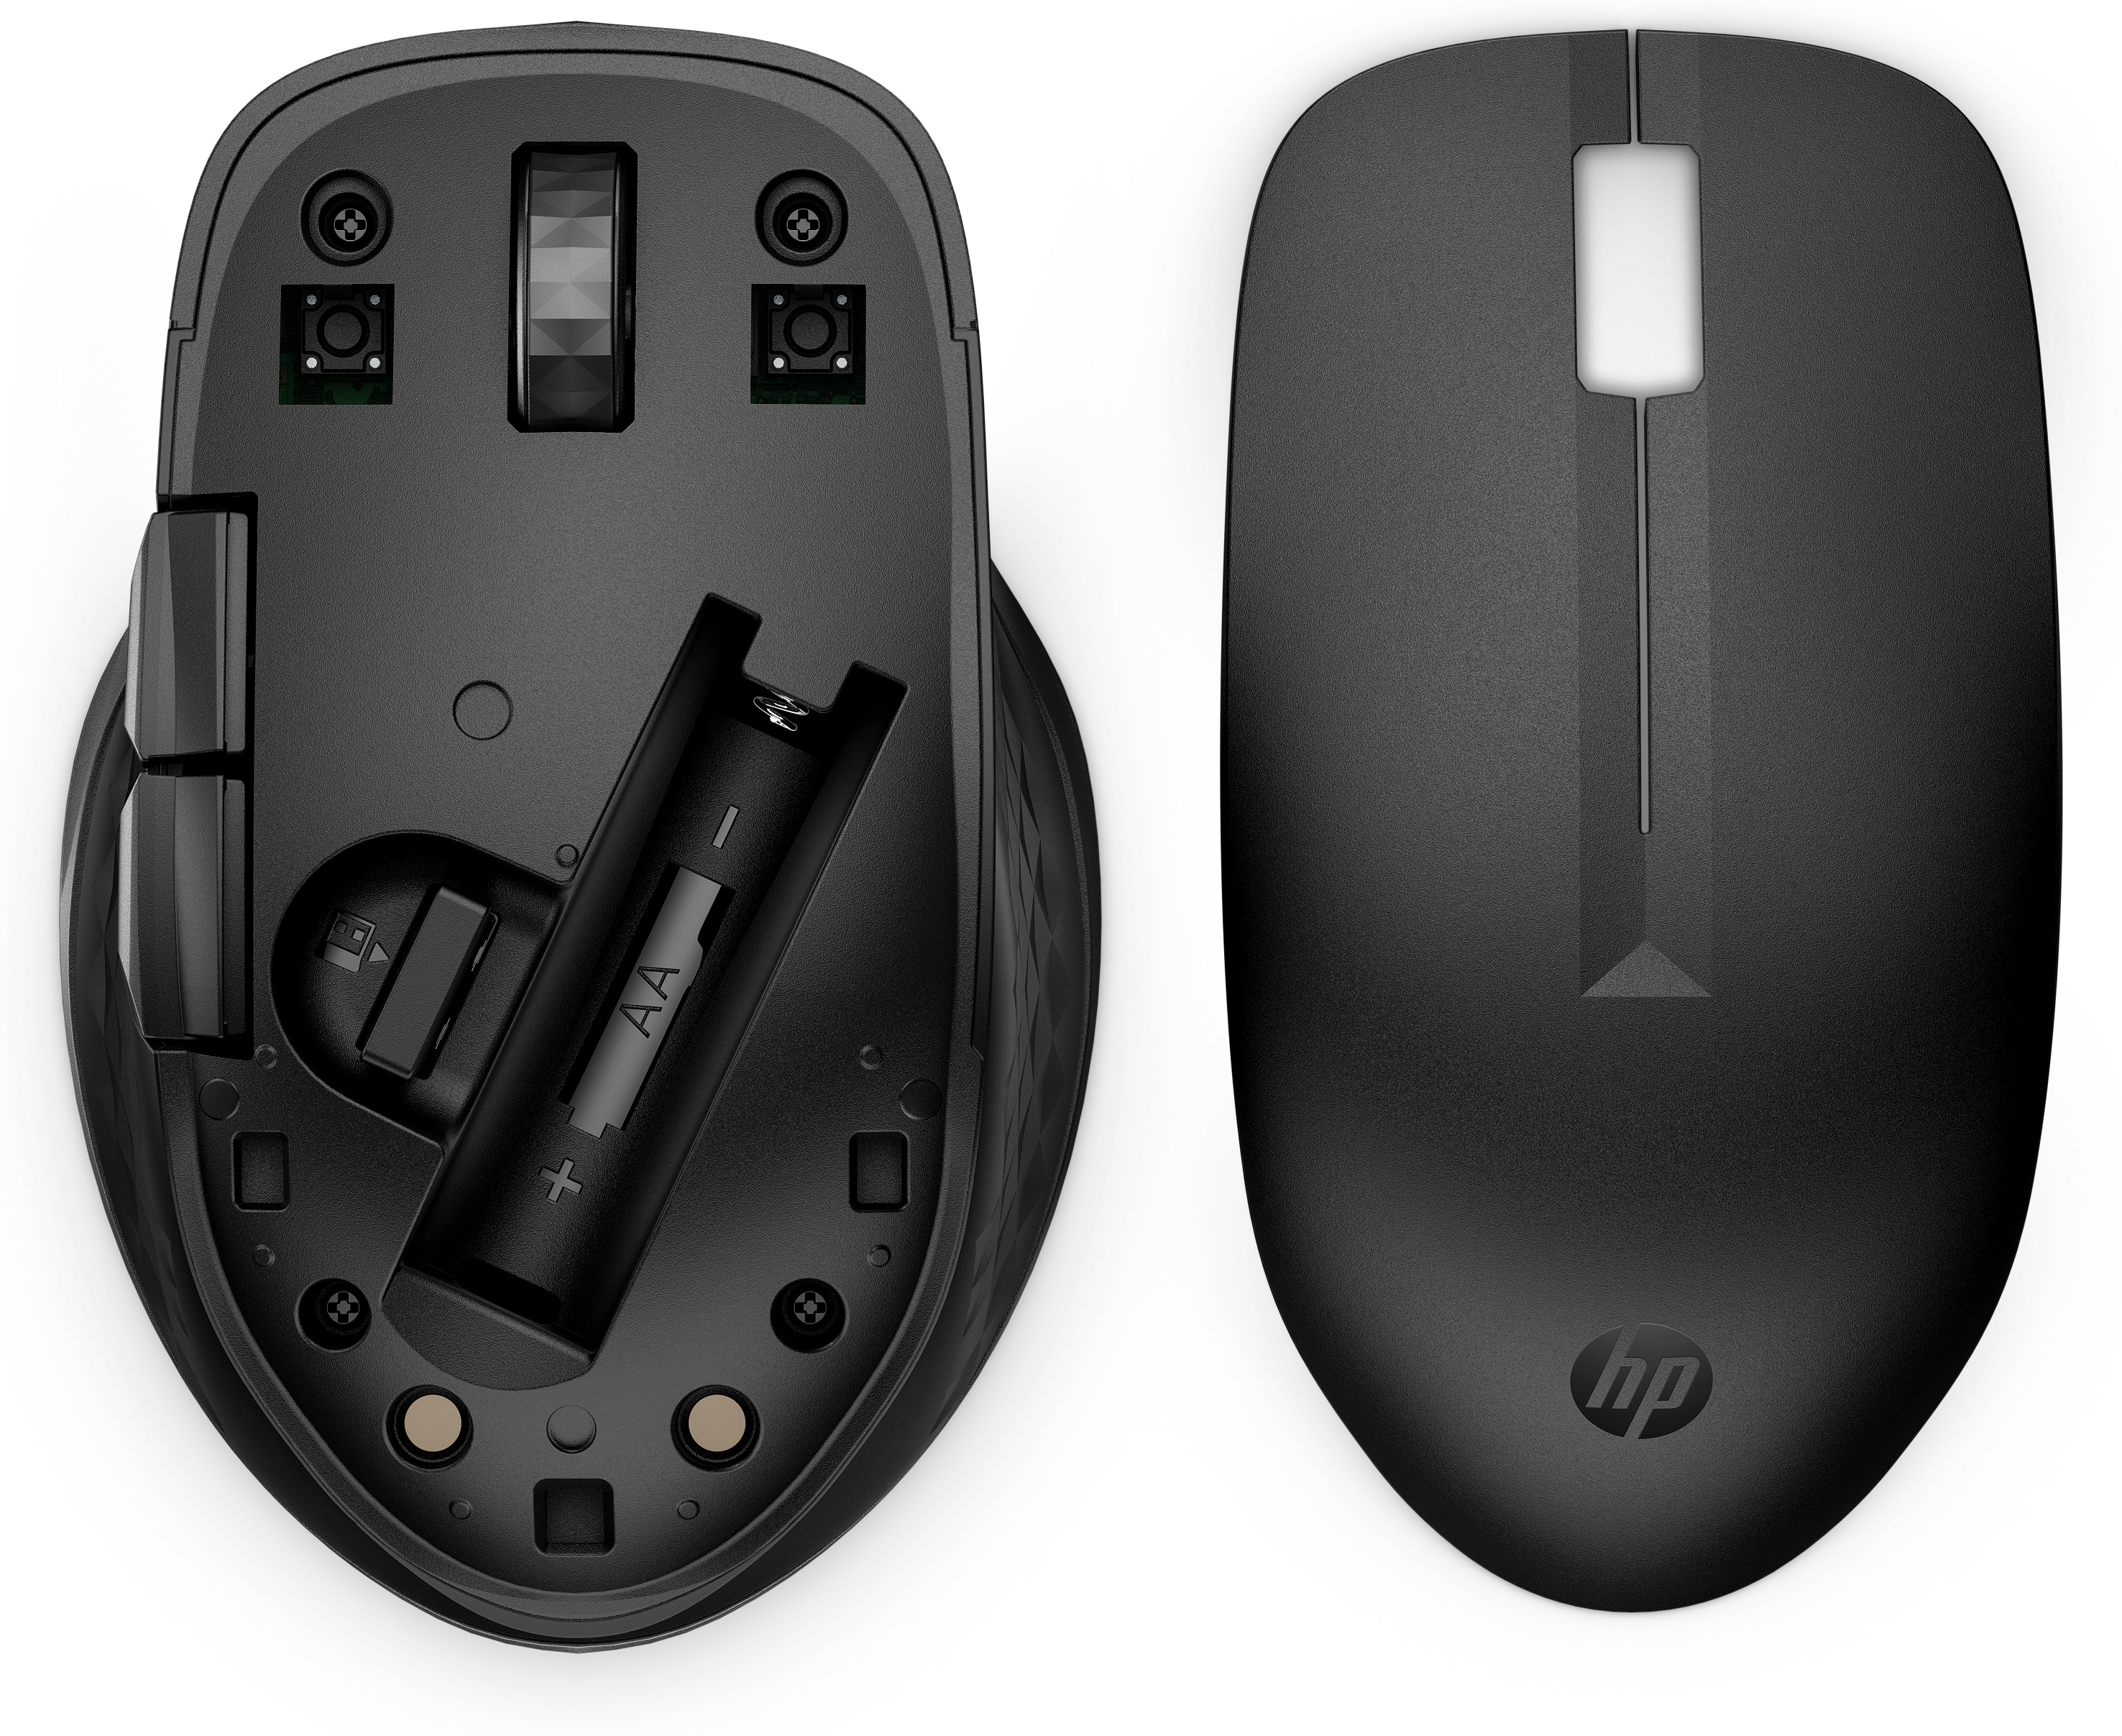 HP 435 Multi-Device Wireless Mouse